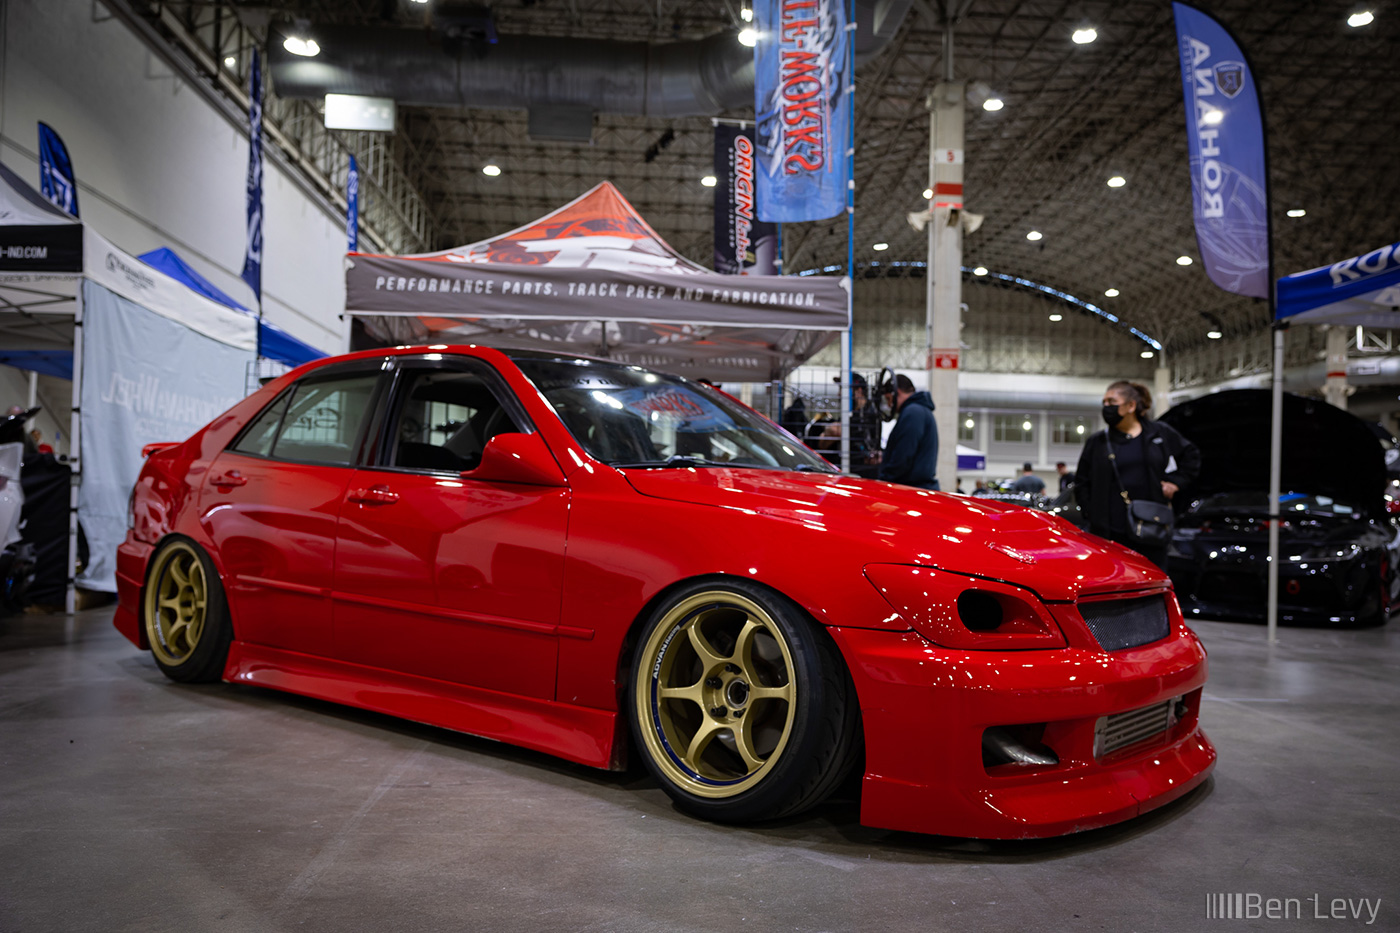 Red Lexus IS300 Drift Car at Touge Factory Booth at Wekfest Chicago